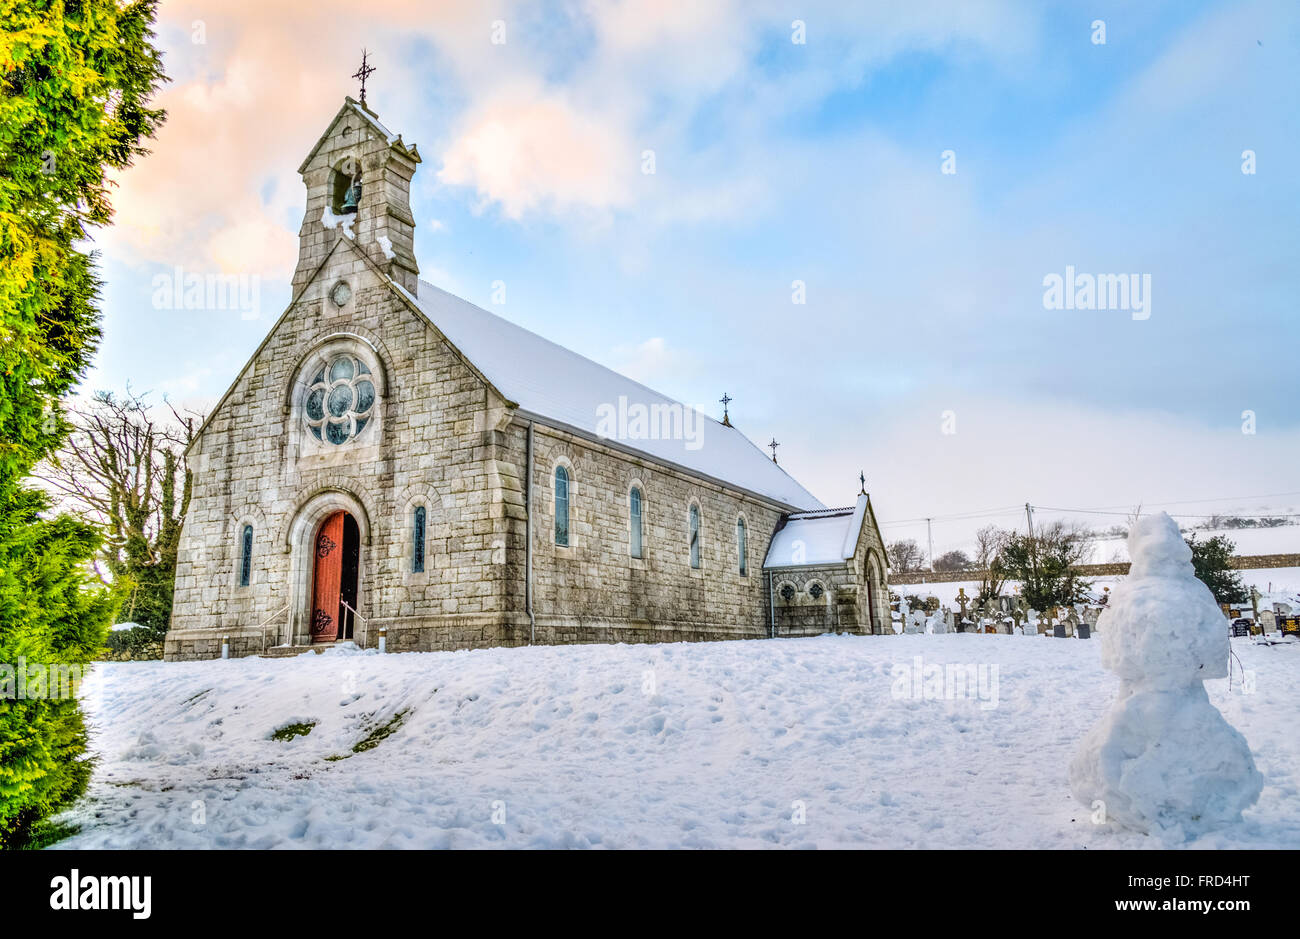 Church in the snow with sunset skies in the background, along with follliage in the corner Stock Photo